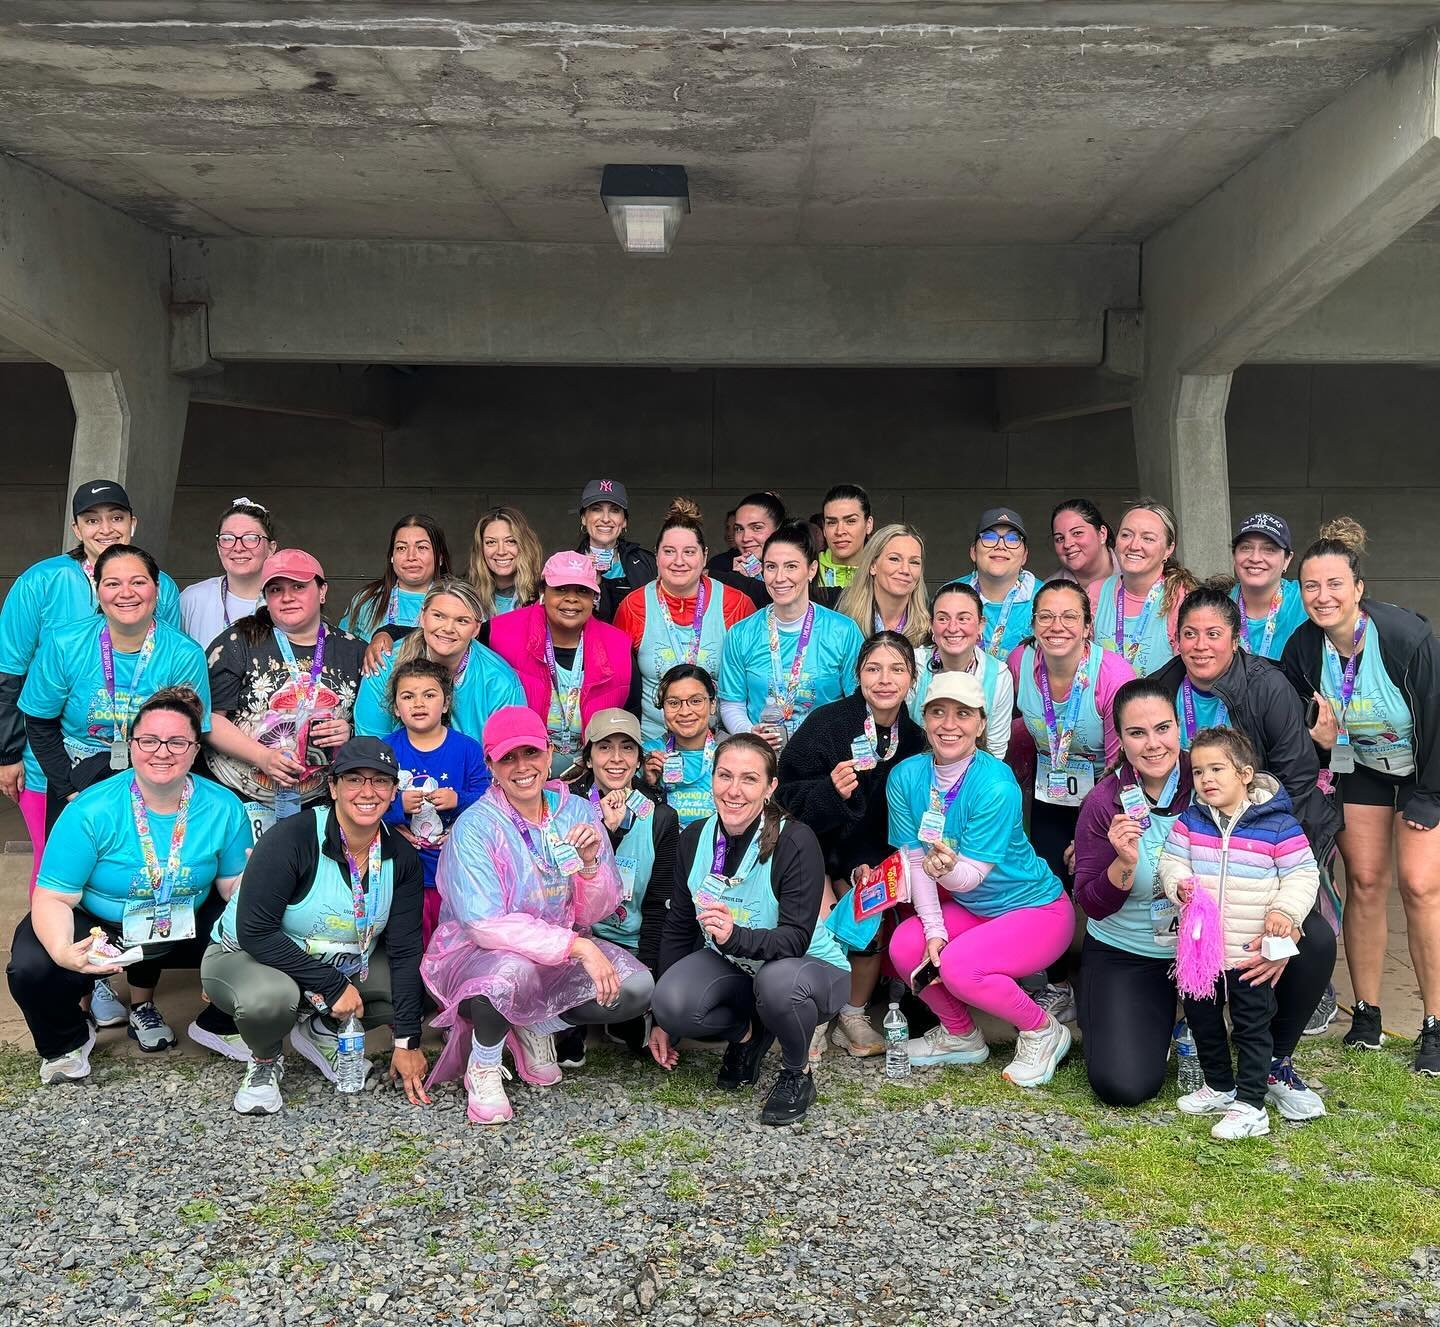 32 of us ran a 5k this morning!! 

EVOLVING 🦋

&amp; when you think you can&rsquo;t - i&rsquo;m going to ensure you prove to yourself that you absolutely CAN! you&rsquo;ll feel like you can do ANYTHING!! ✨ 

JOIN US 💖🫶🏼✨

#DGFITARMY